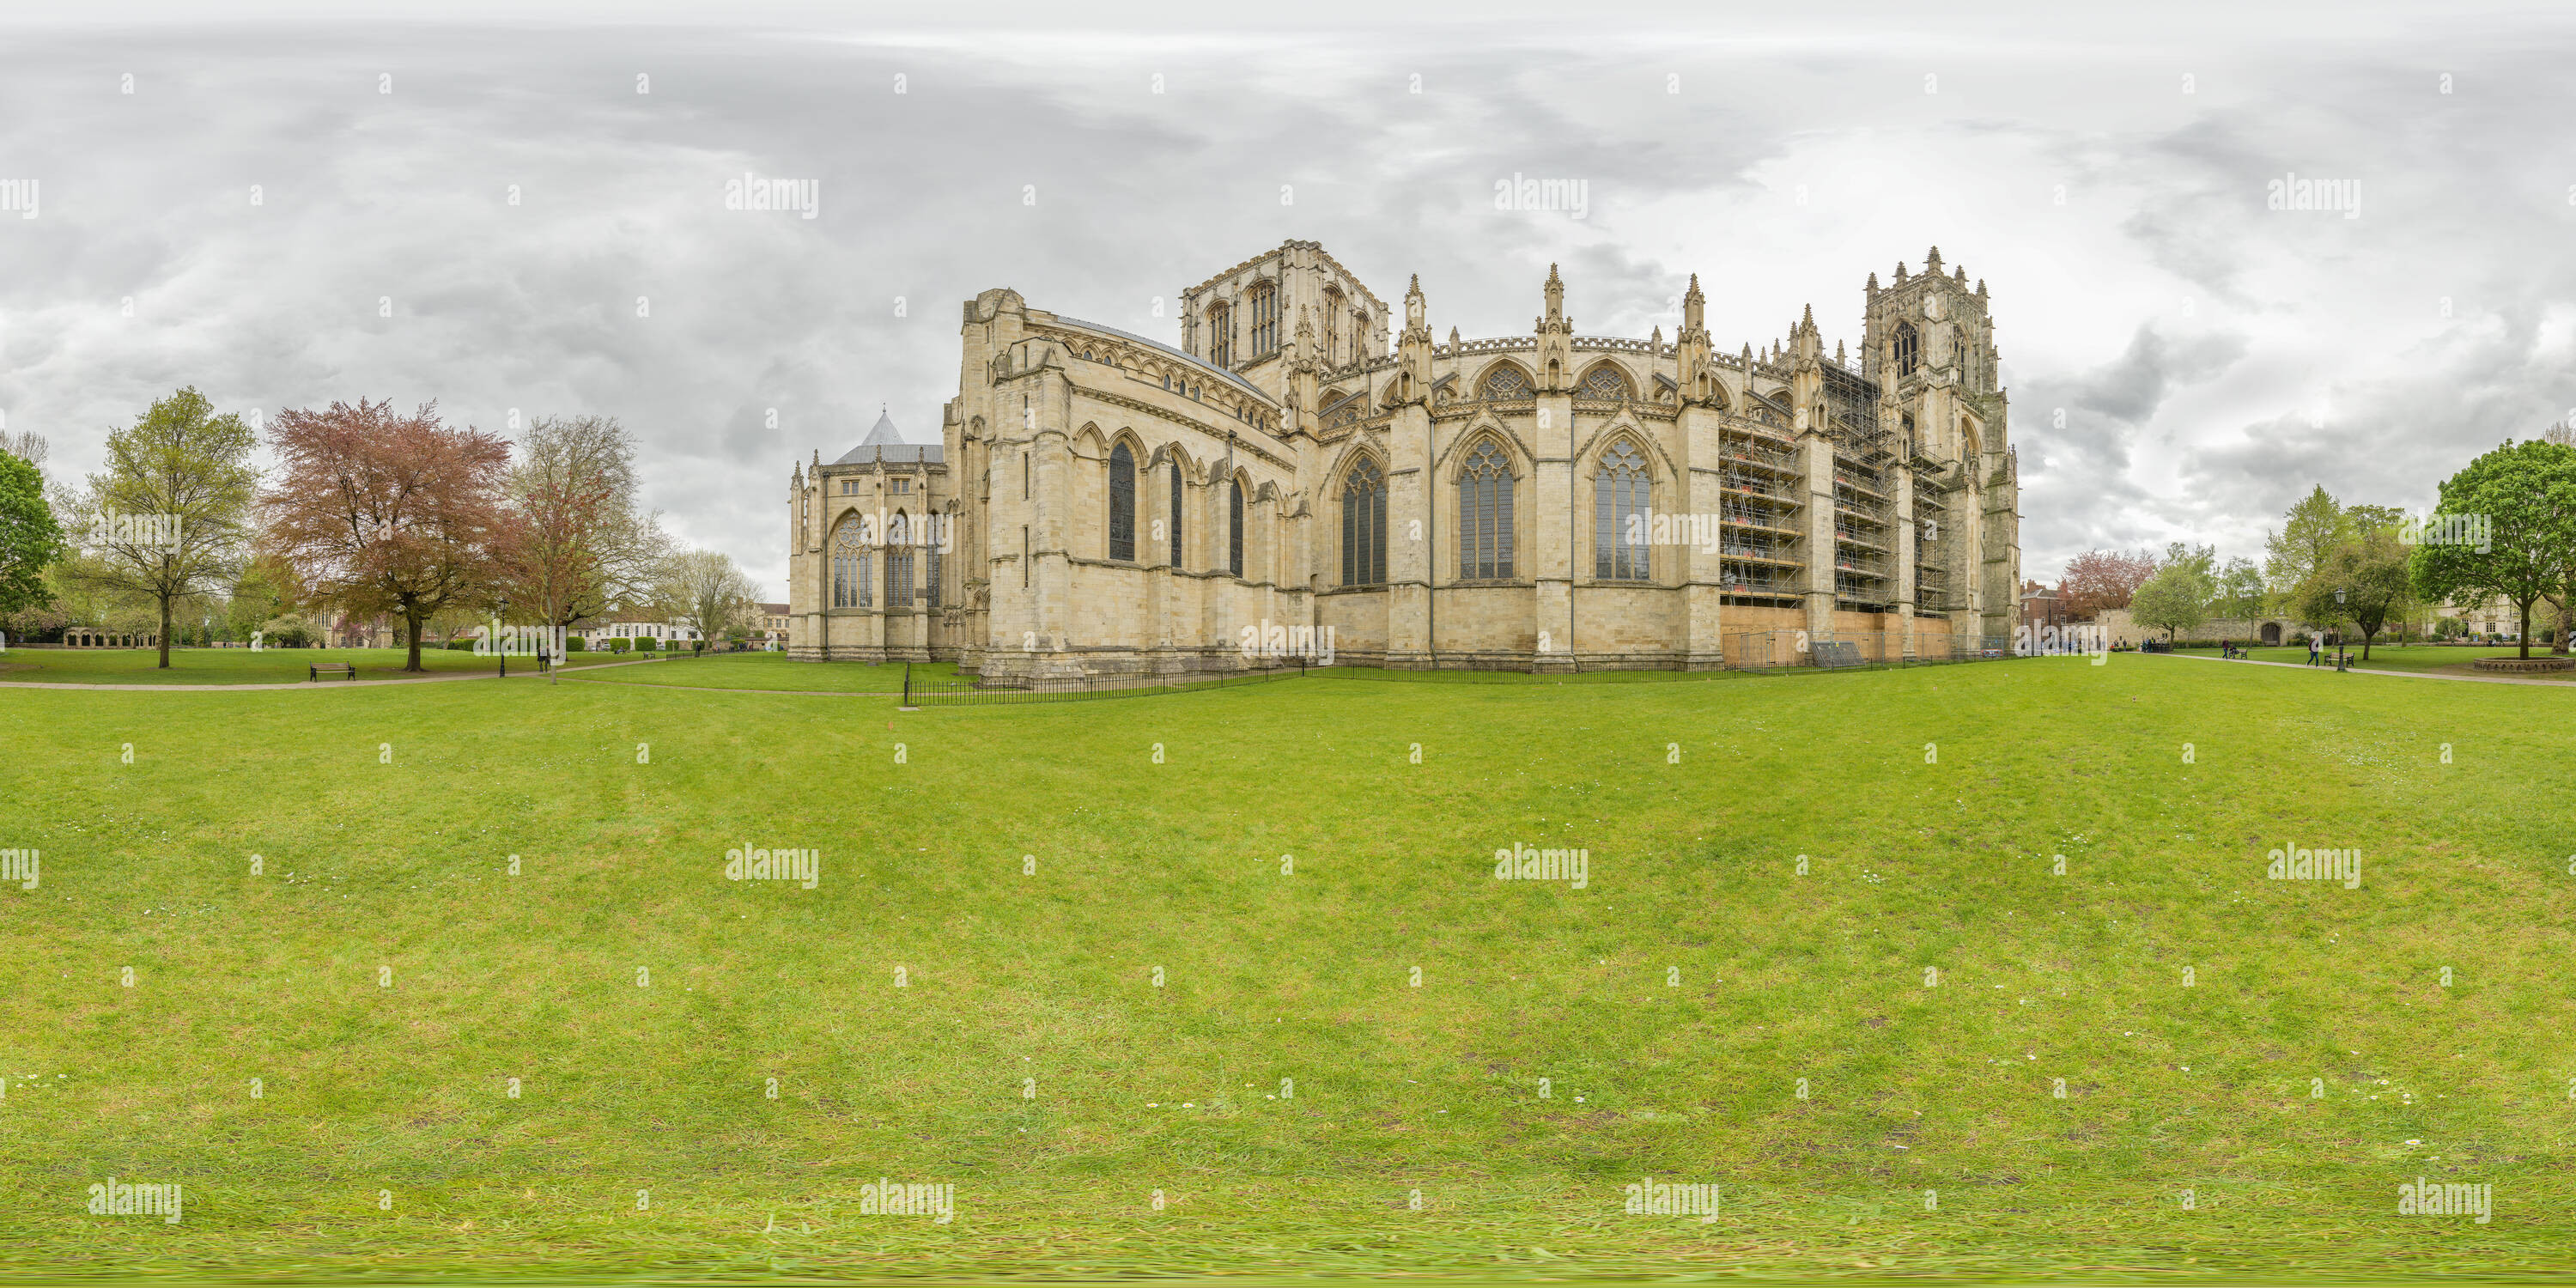 360 degree panoramic view of Dean's park and the north exterior of the medieval cathedral (minster) at York, England, on an overcast spring day.